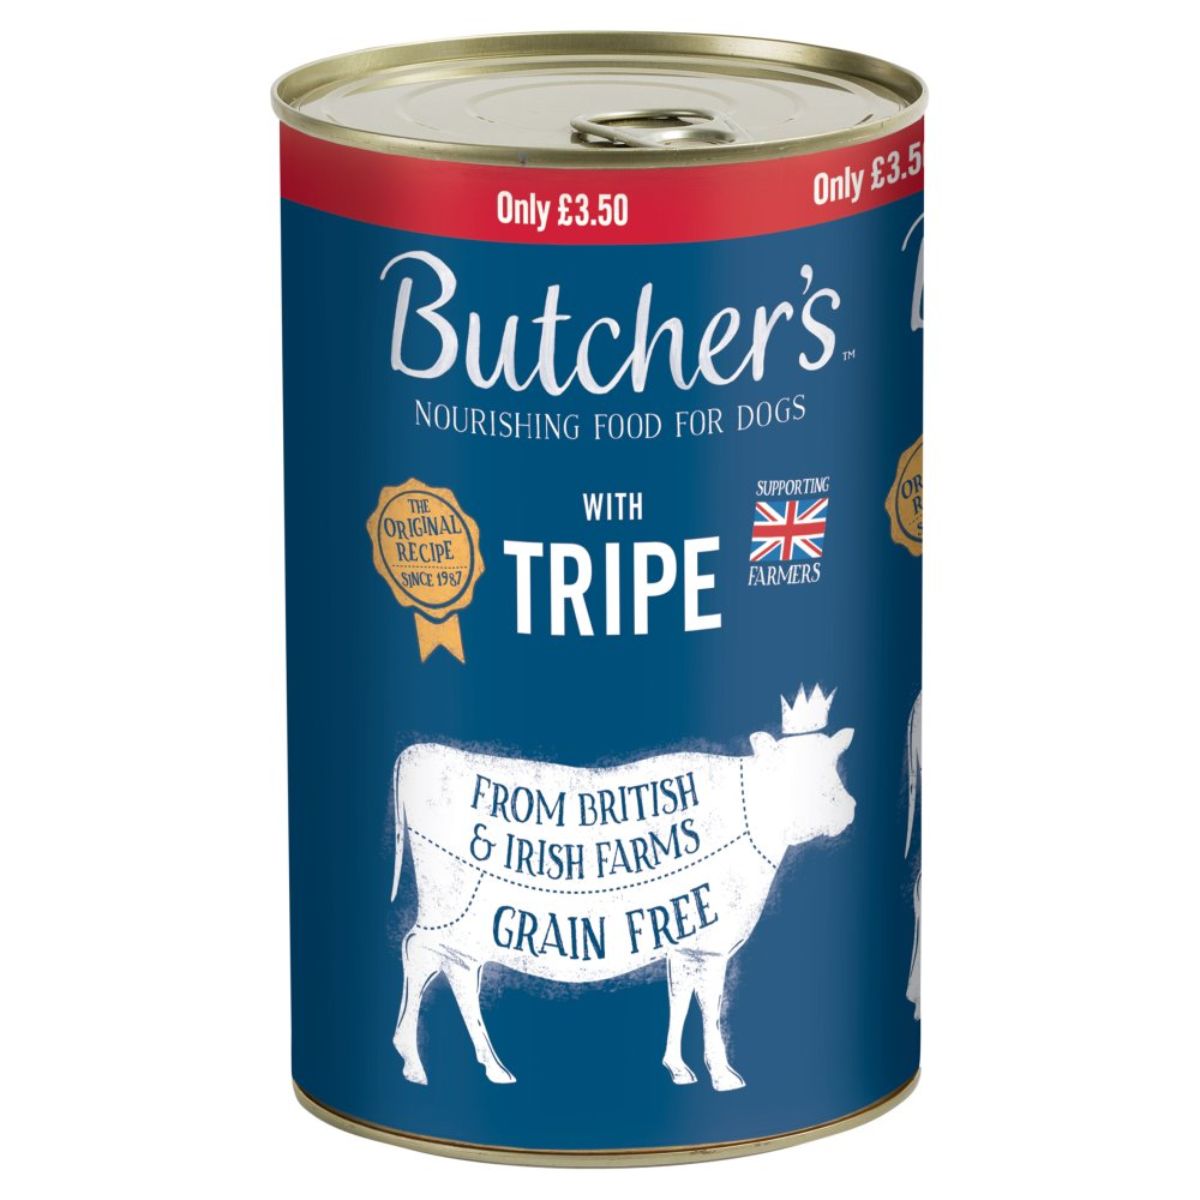 Butcher's - Nourishing Food for Dogs with Tribe - 1200g canned dog food.